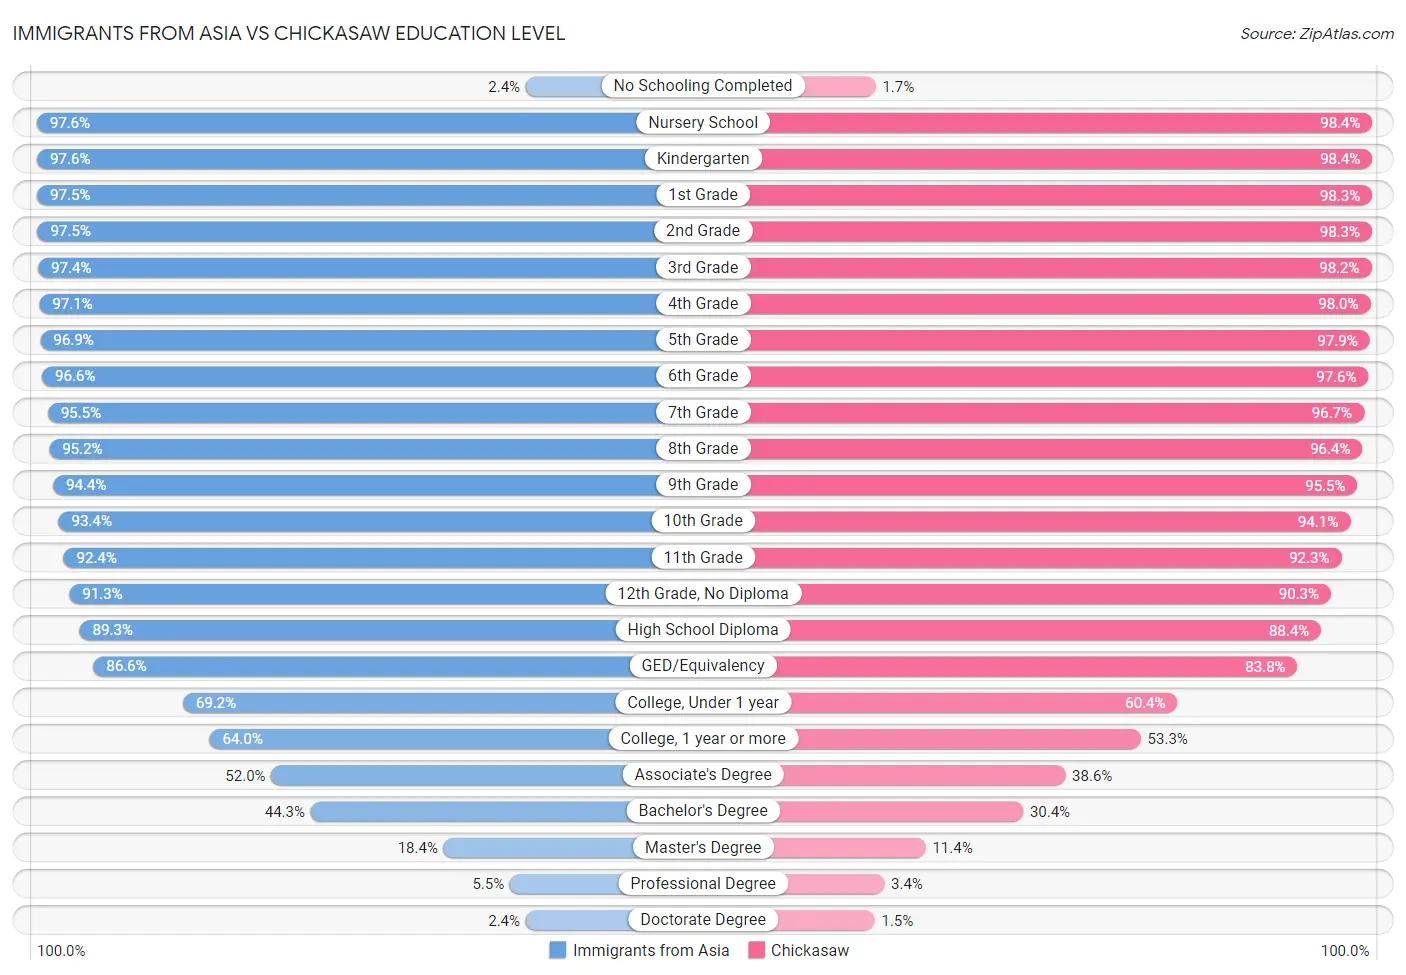 Immigrants from Asia vs Chickasaw Education Level